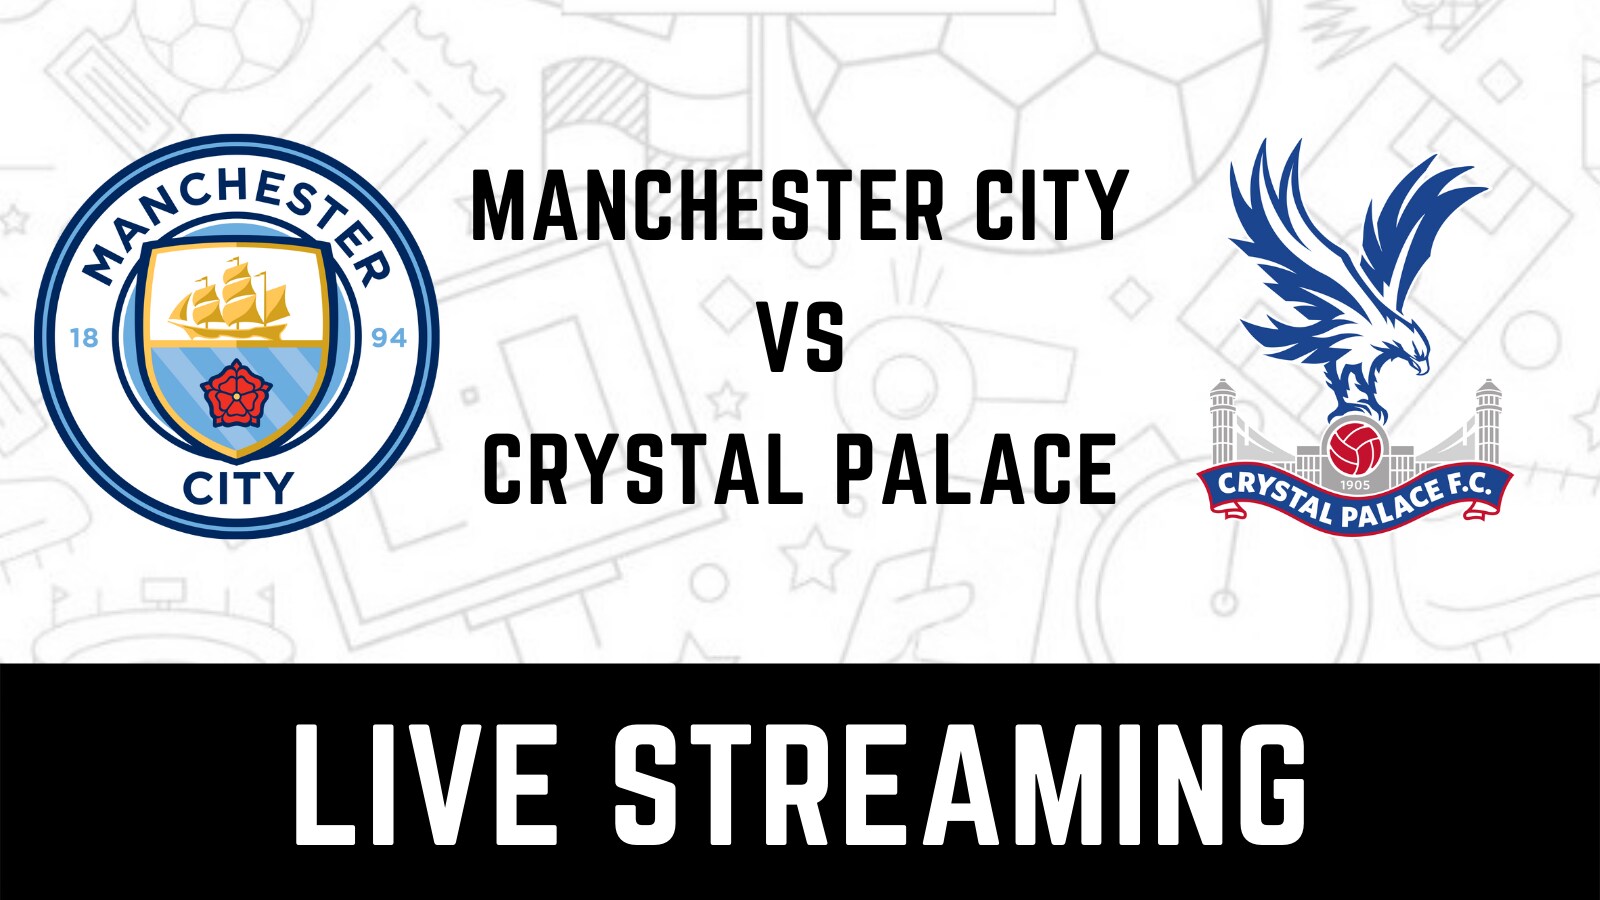 Manchester City vs Crystal Palace Live Streaming When and Where to Watch Premier League Match Live Coverage on Live TV Online